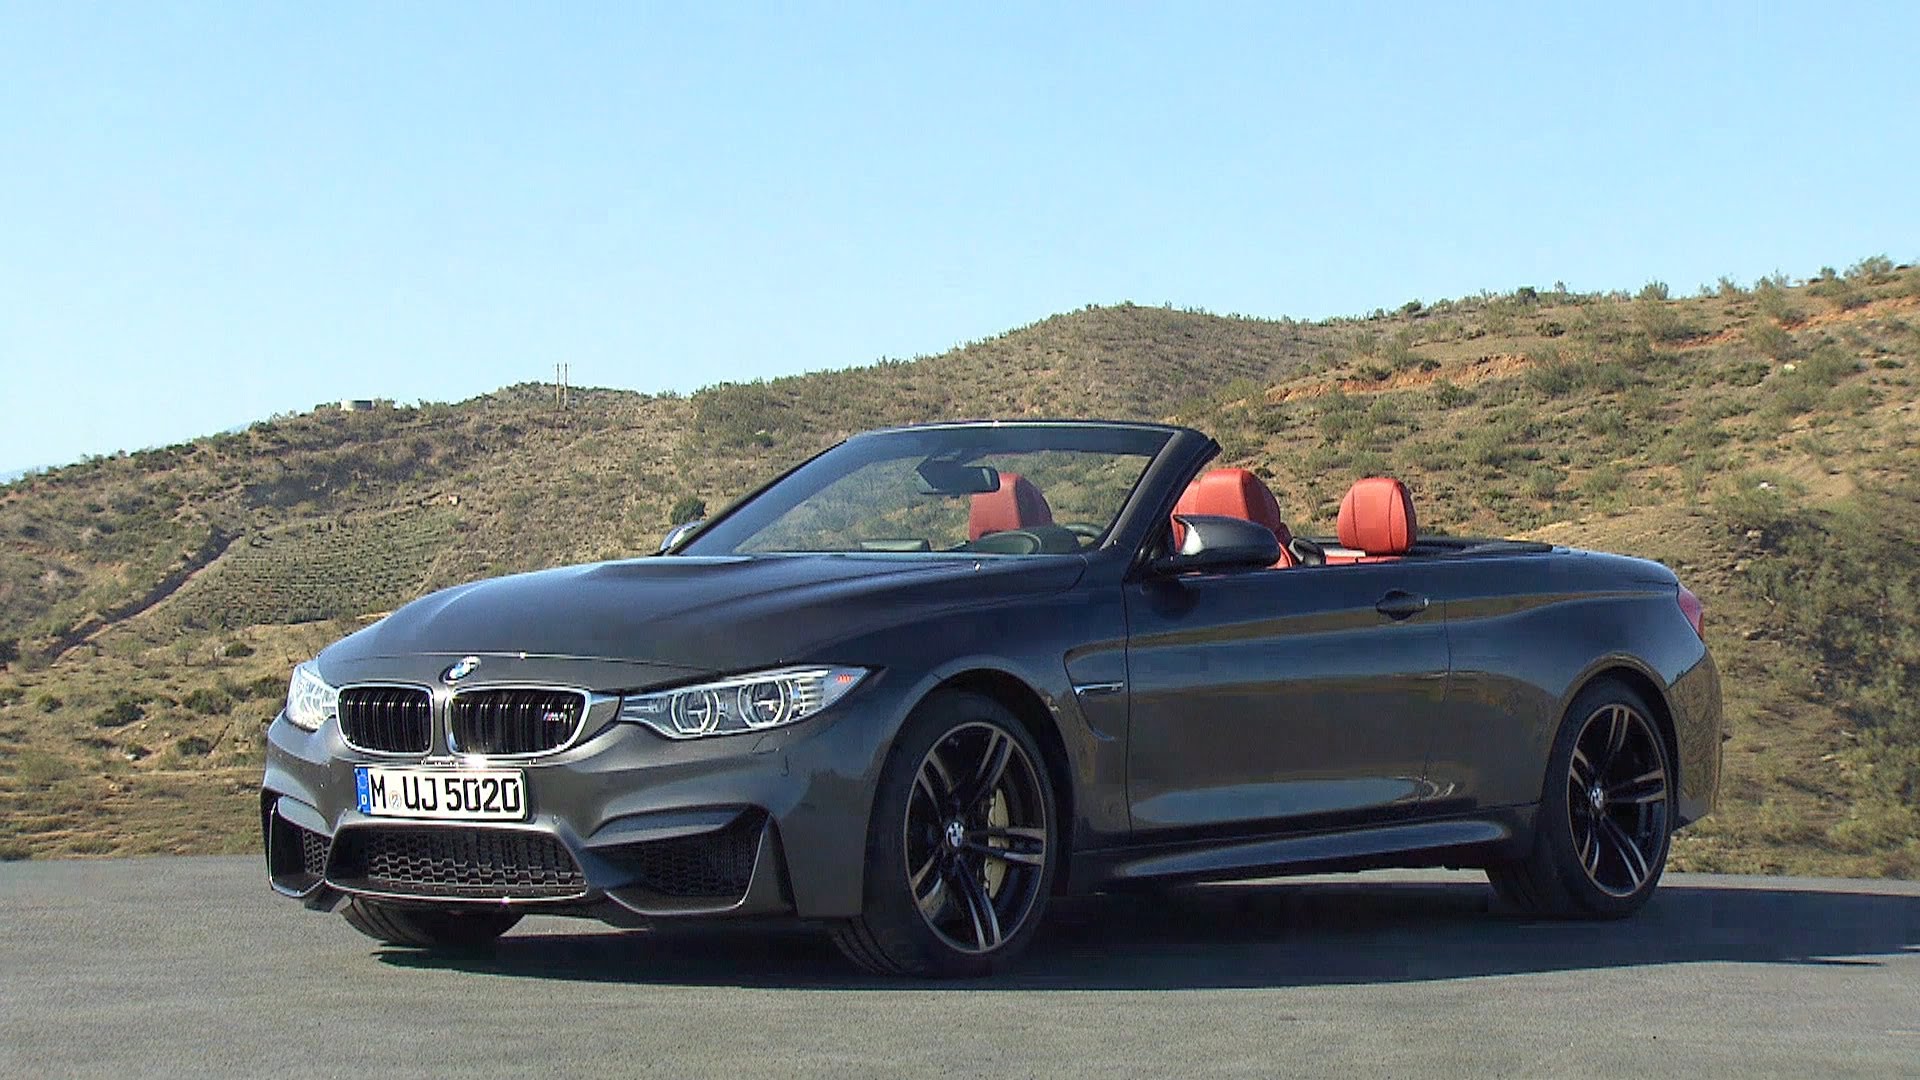 HQ 2015 BMW M4 Cabrio Wallpapers | File 370.85Kb